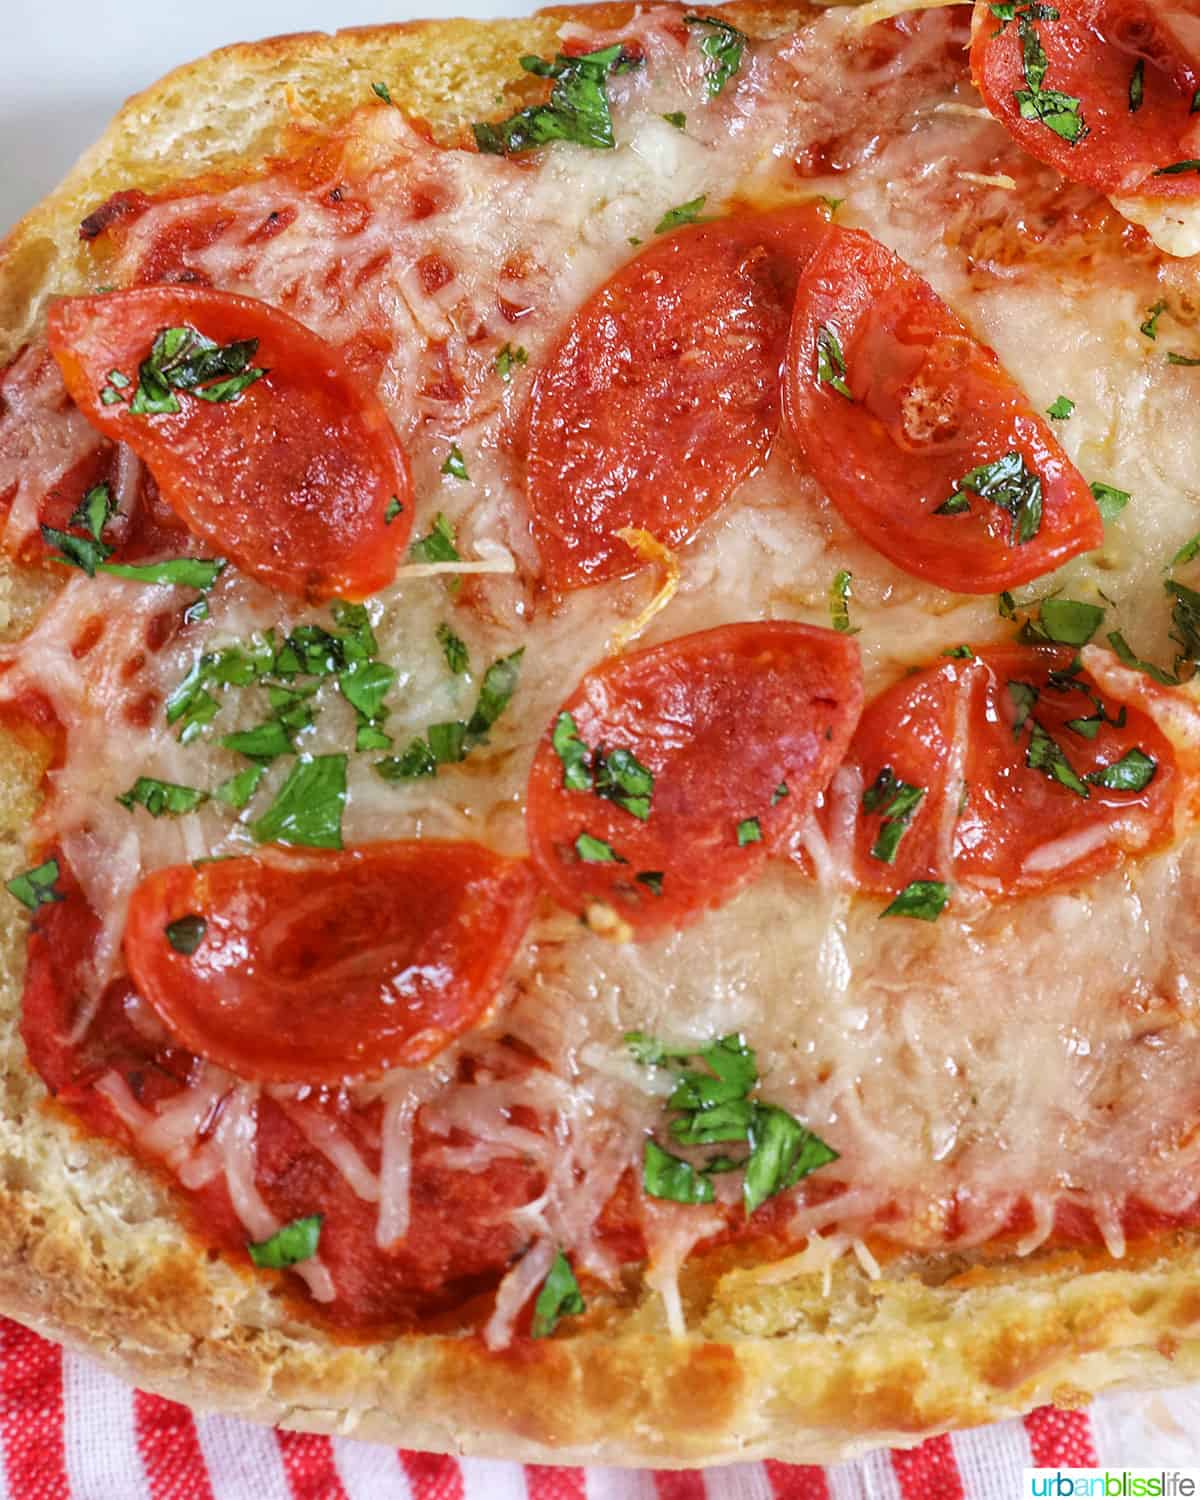 pepperoni french bread pizza with parsley and cheese on a red striped napkin.